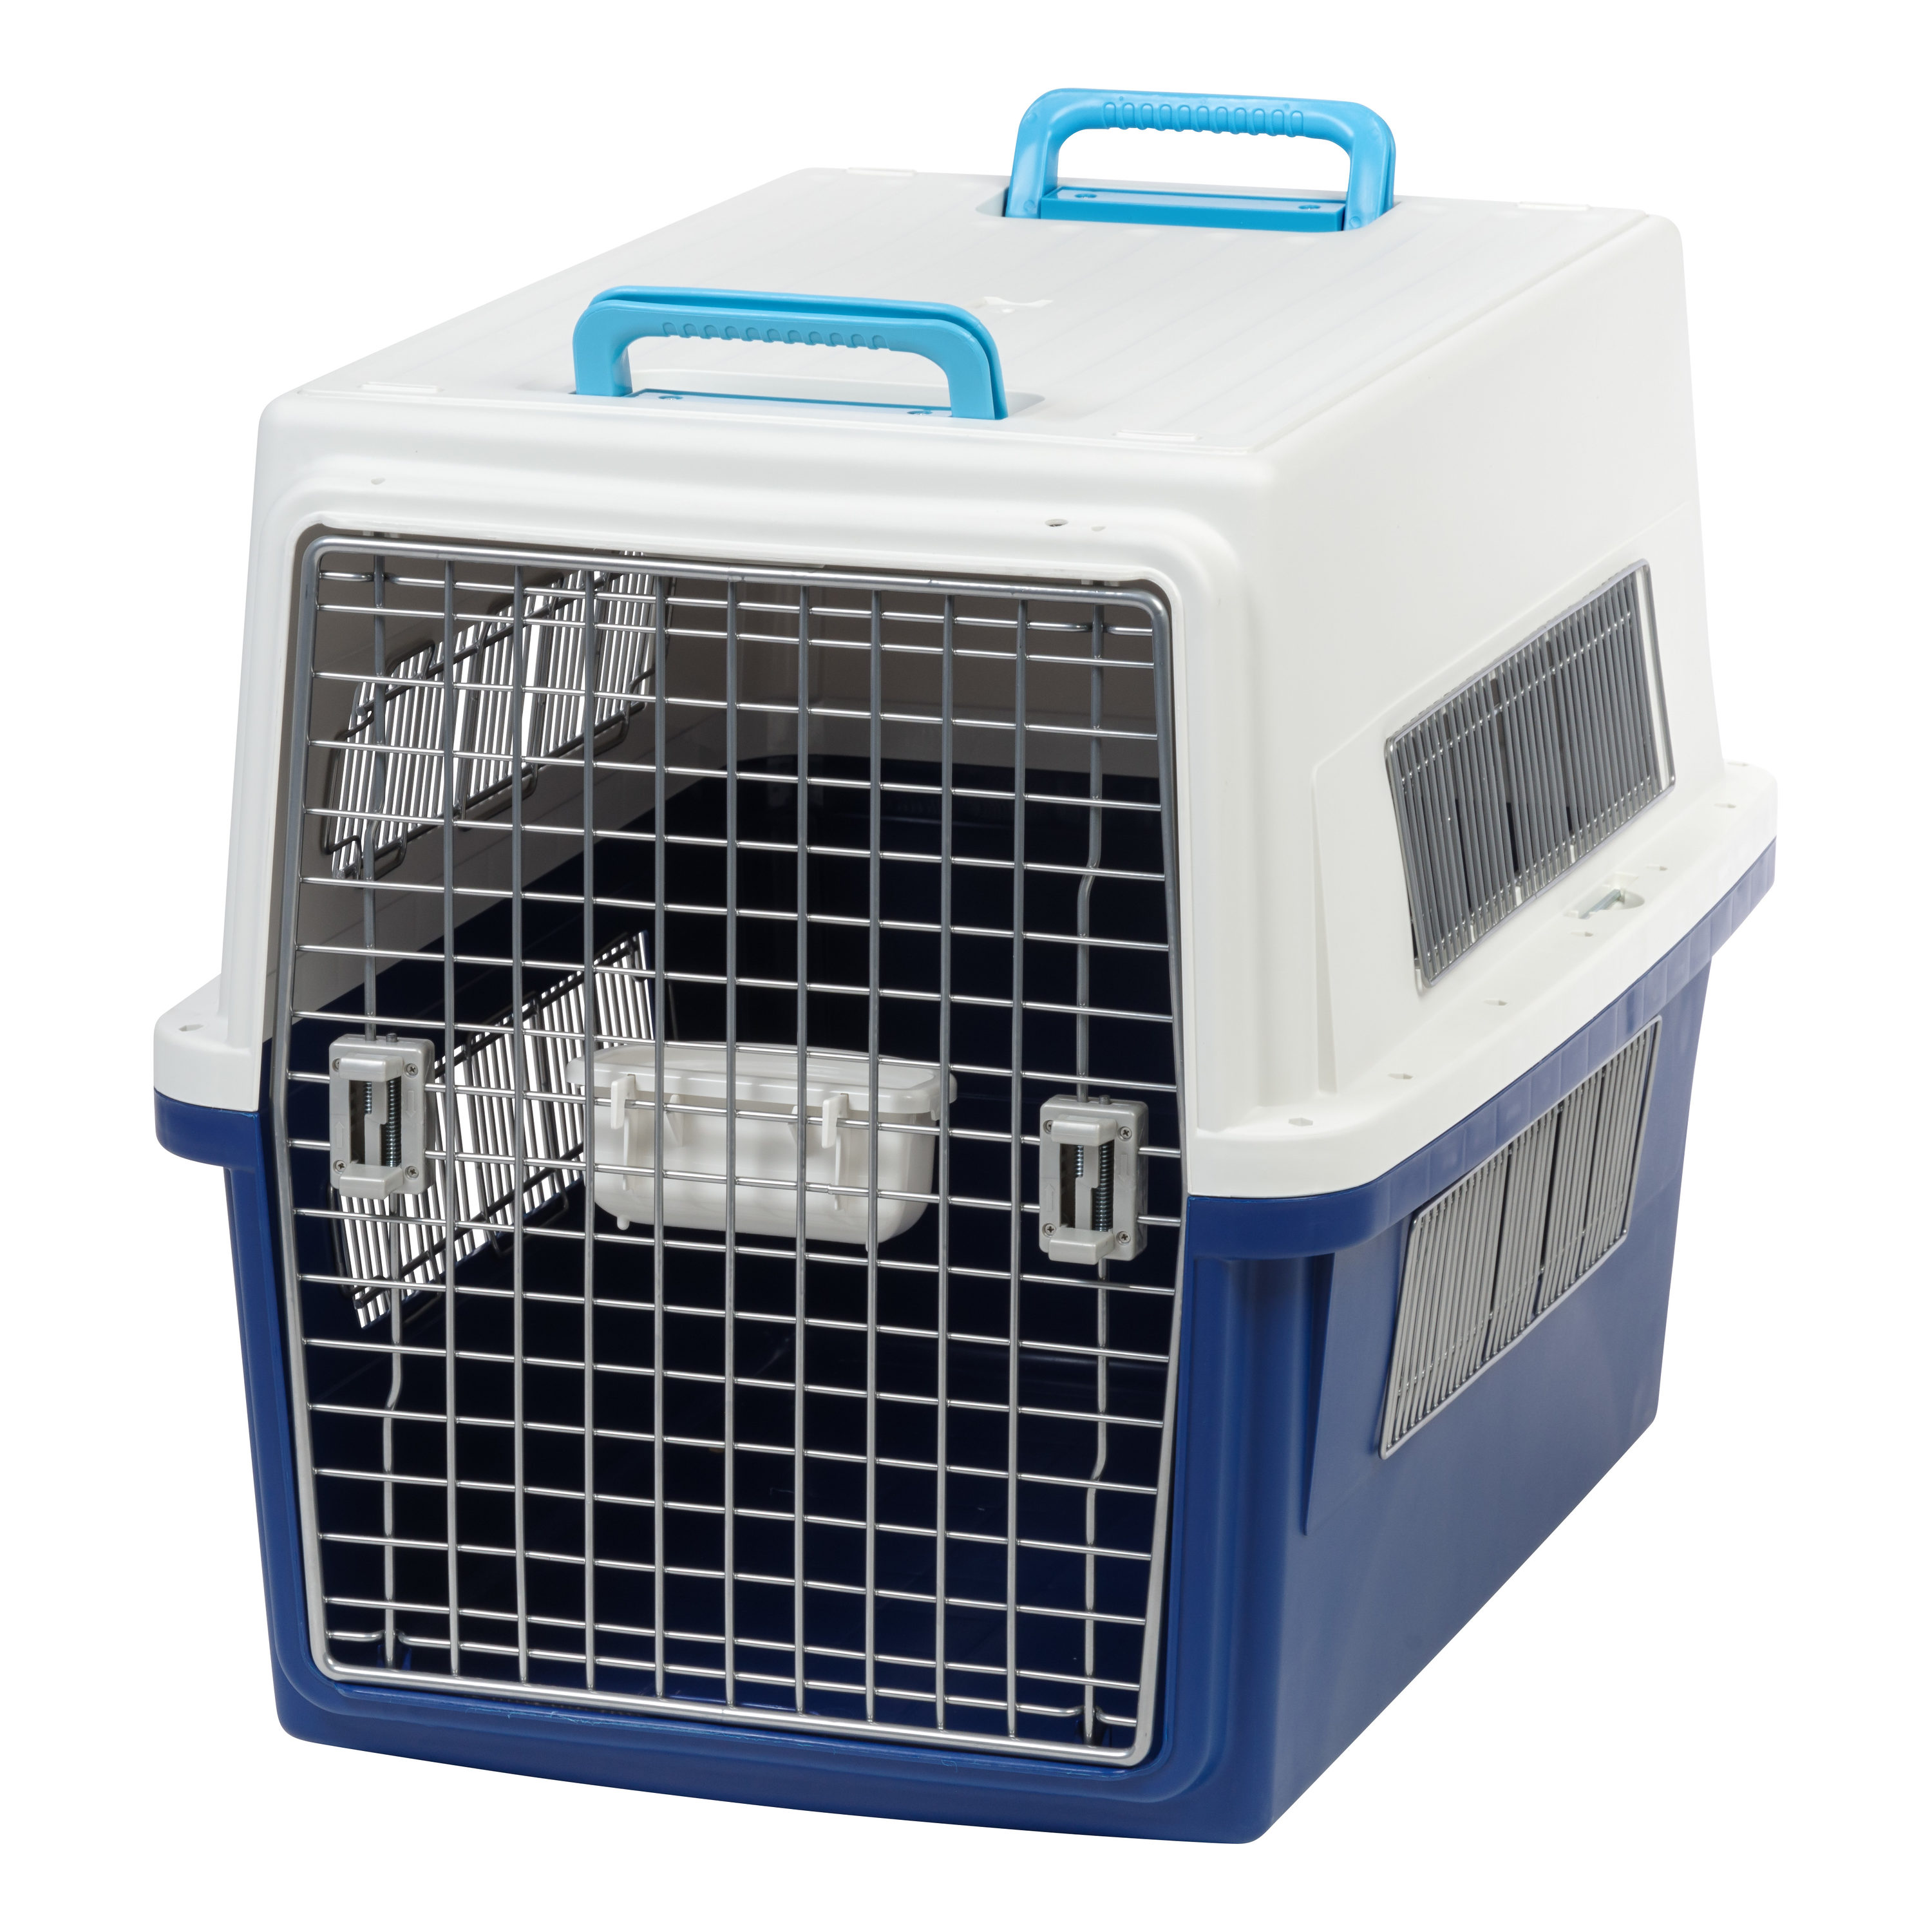 Iris Collapsible Pet Carrier Airline Approved 